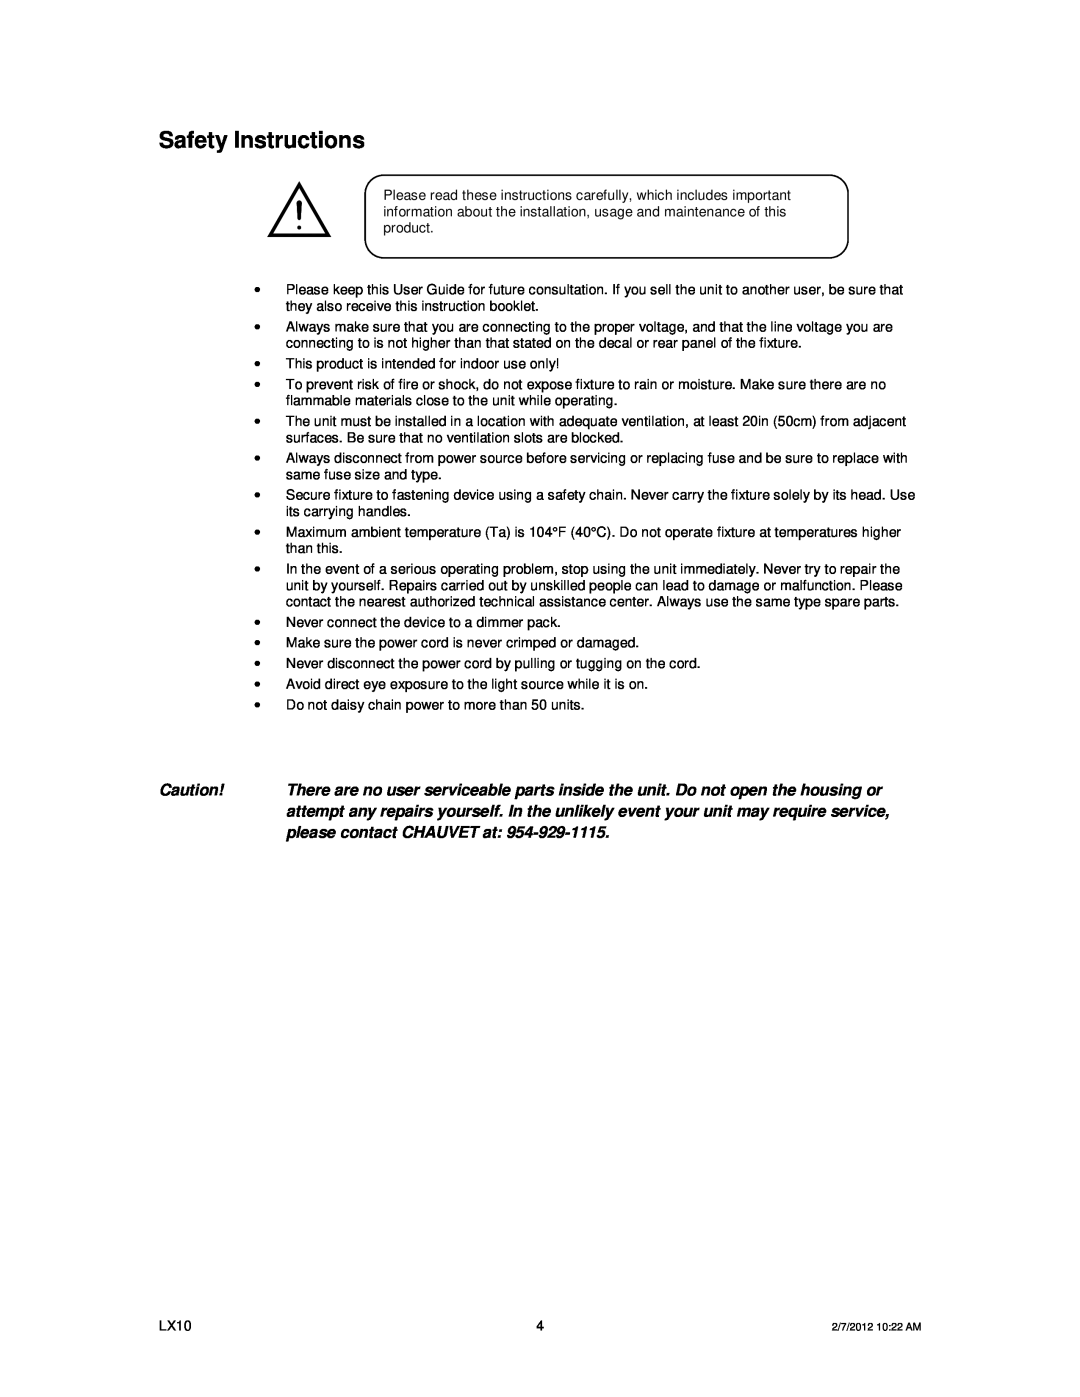 Chauvet LX10 user manual Safety Instructions 